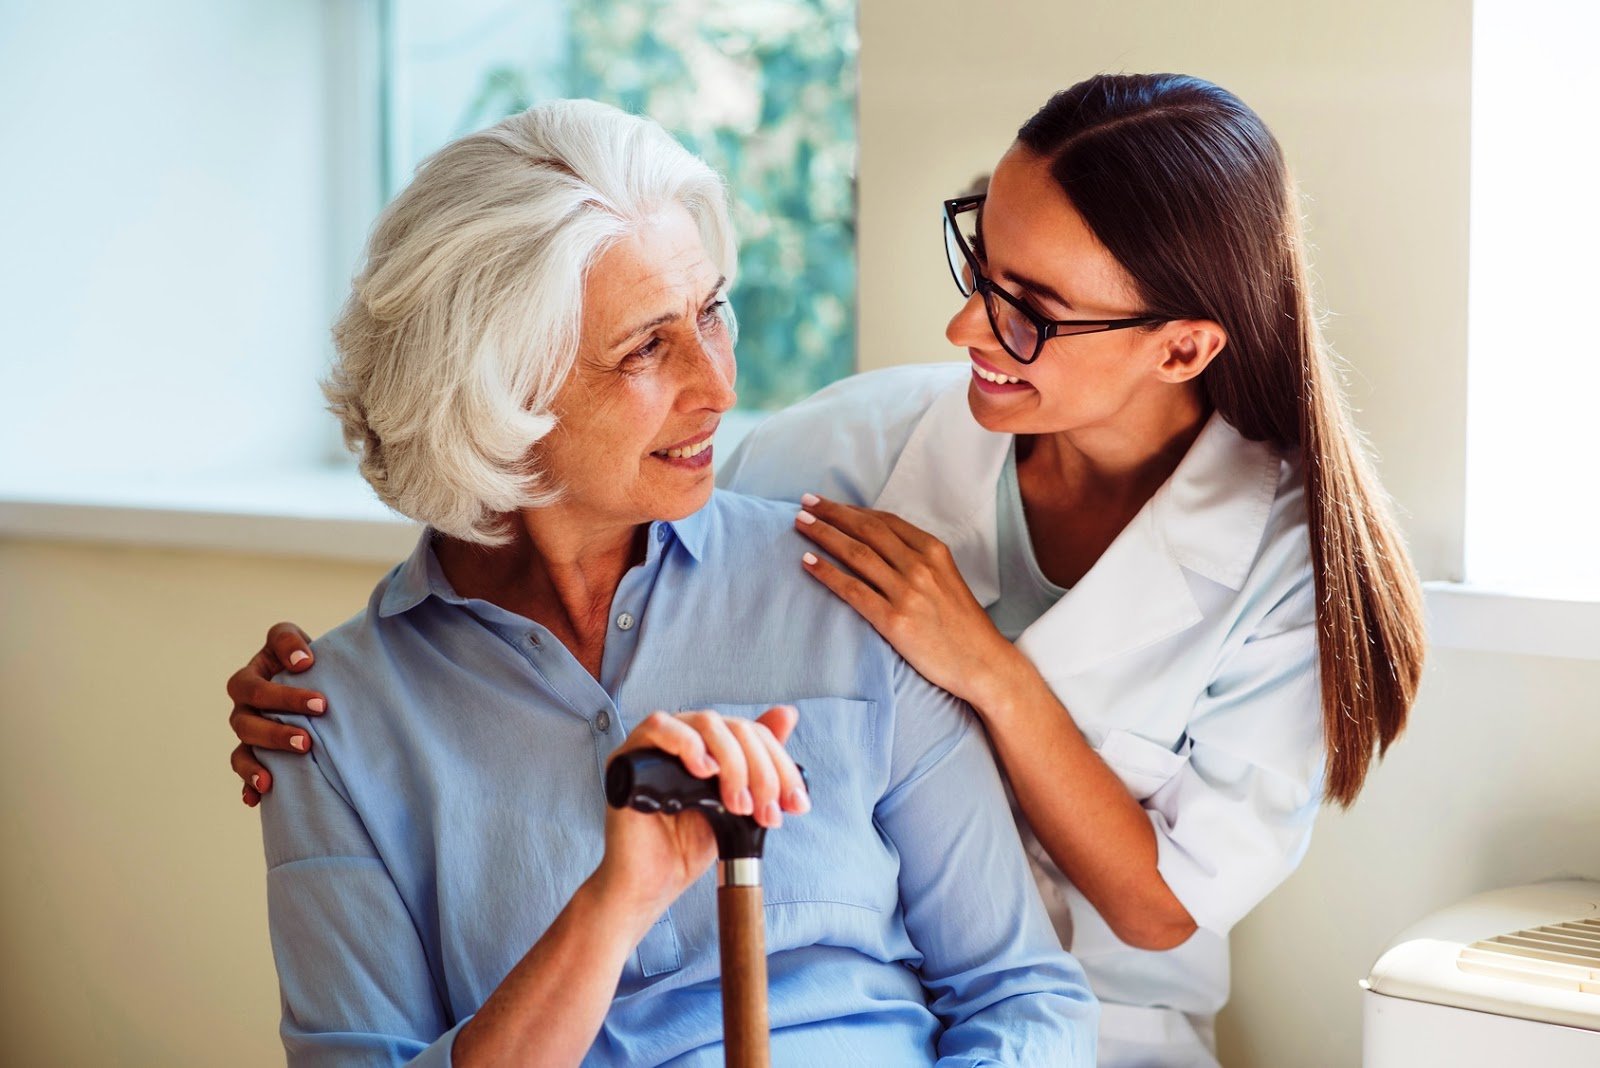 Things to Know About Parkinsons as a Caregiver